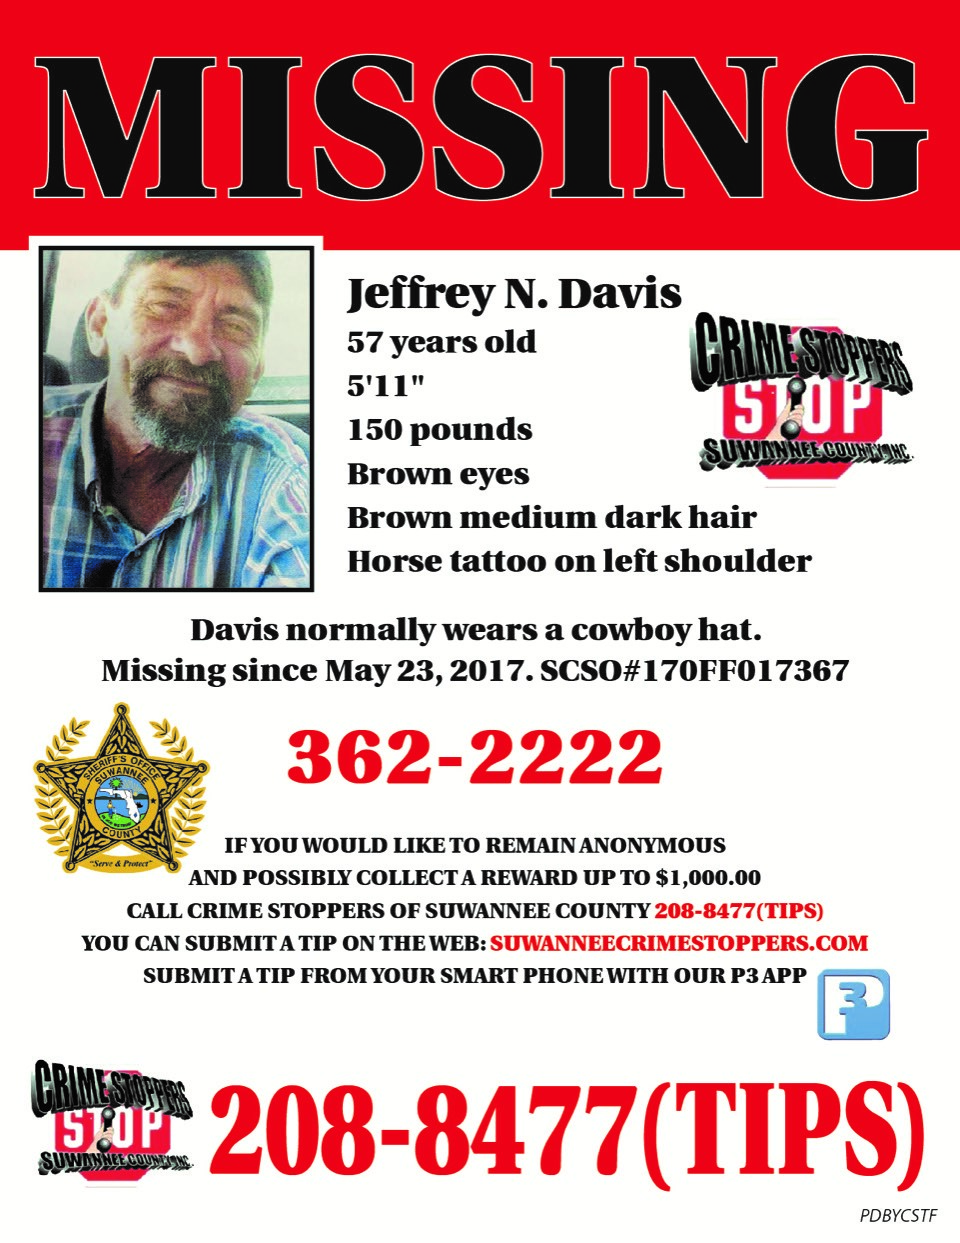 Missing Persons Crime Stoppers Of Suwannee County